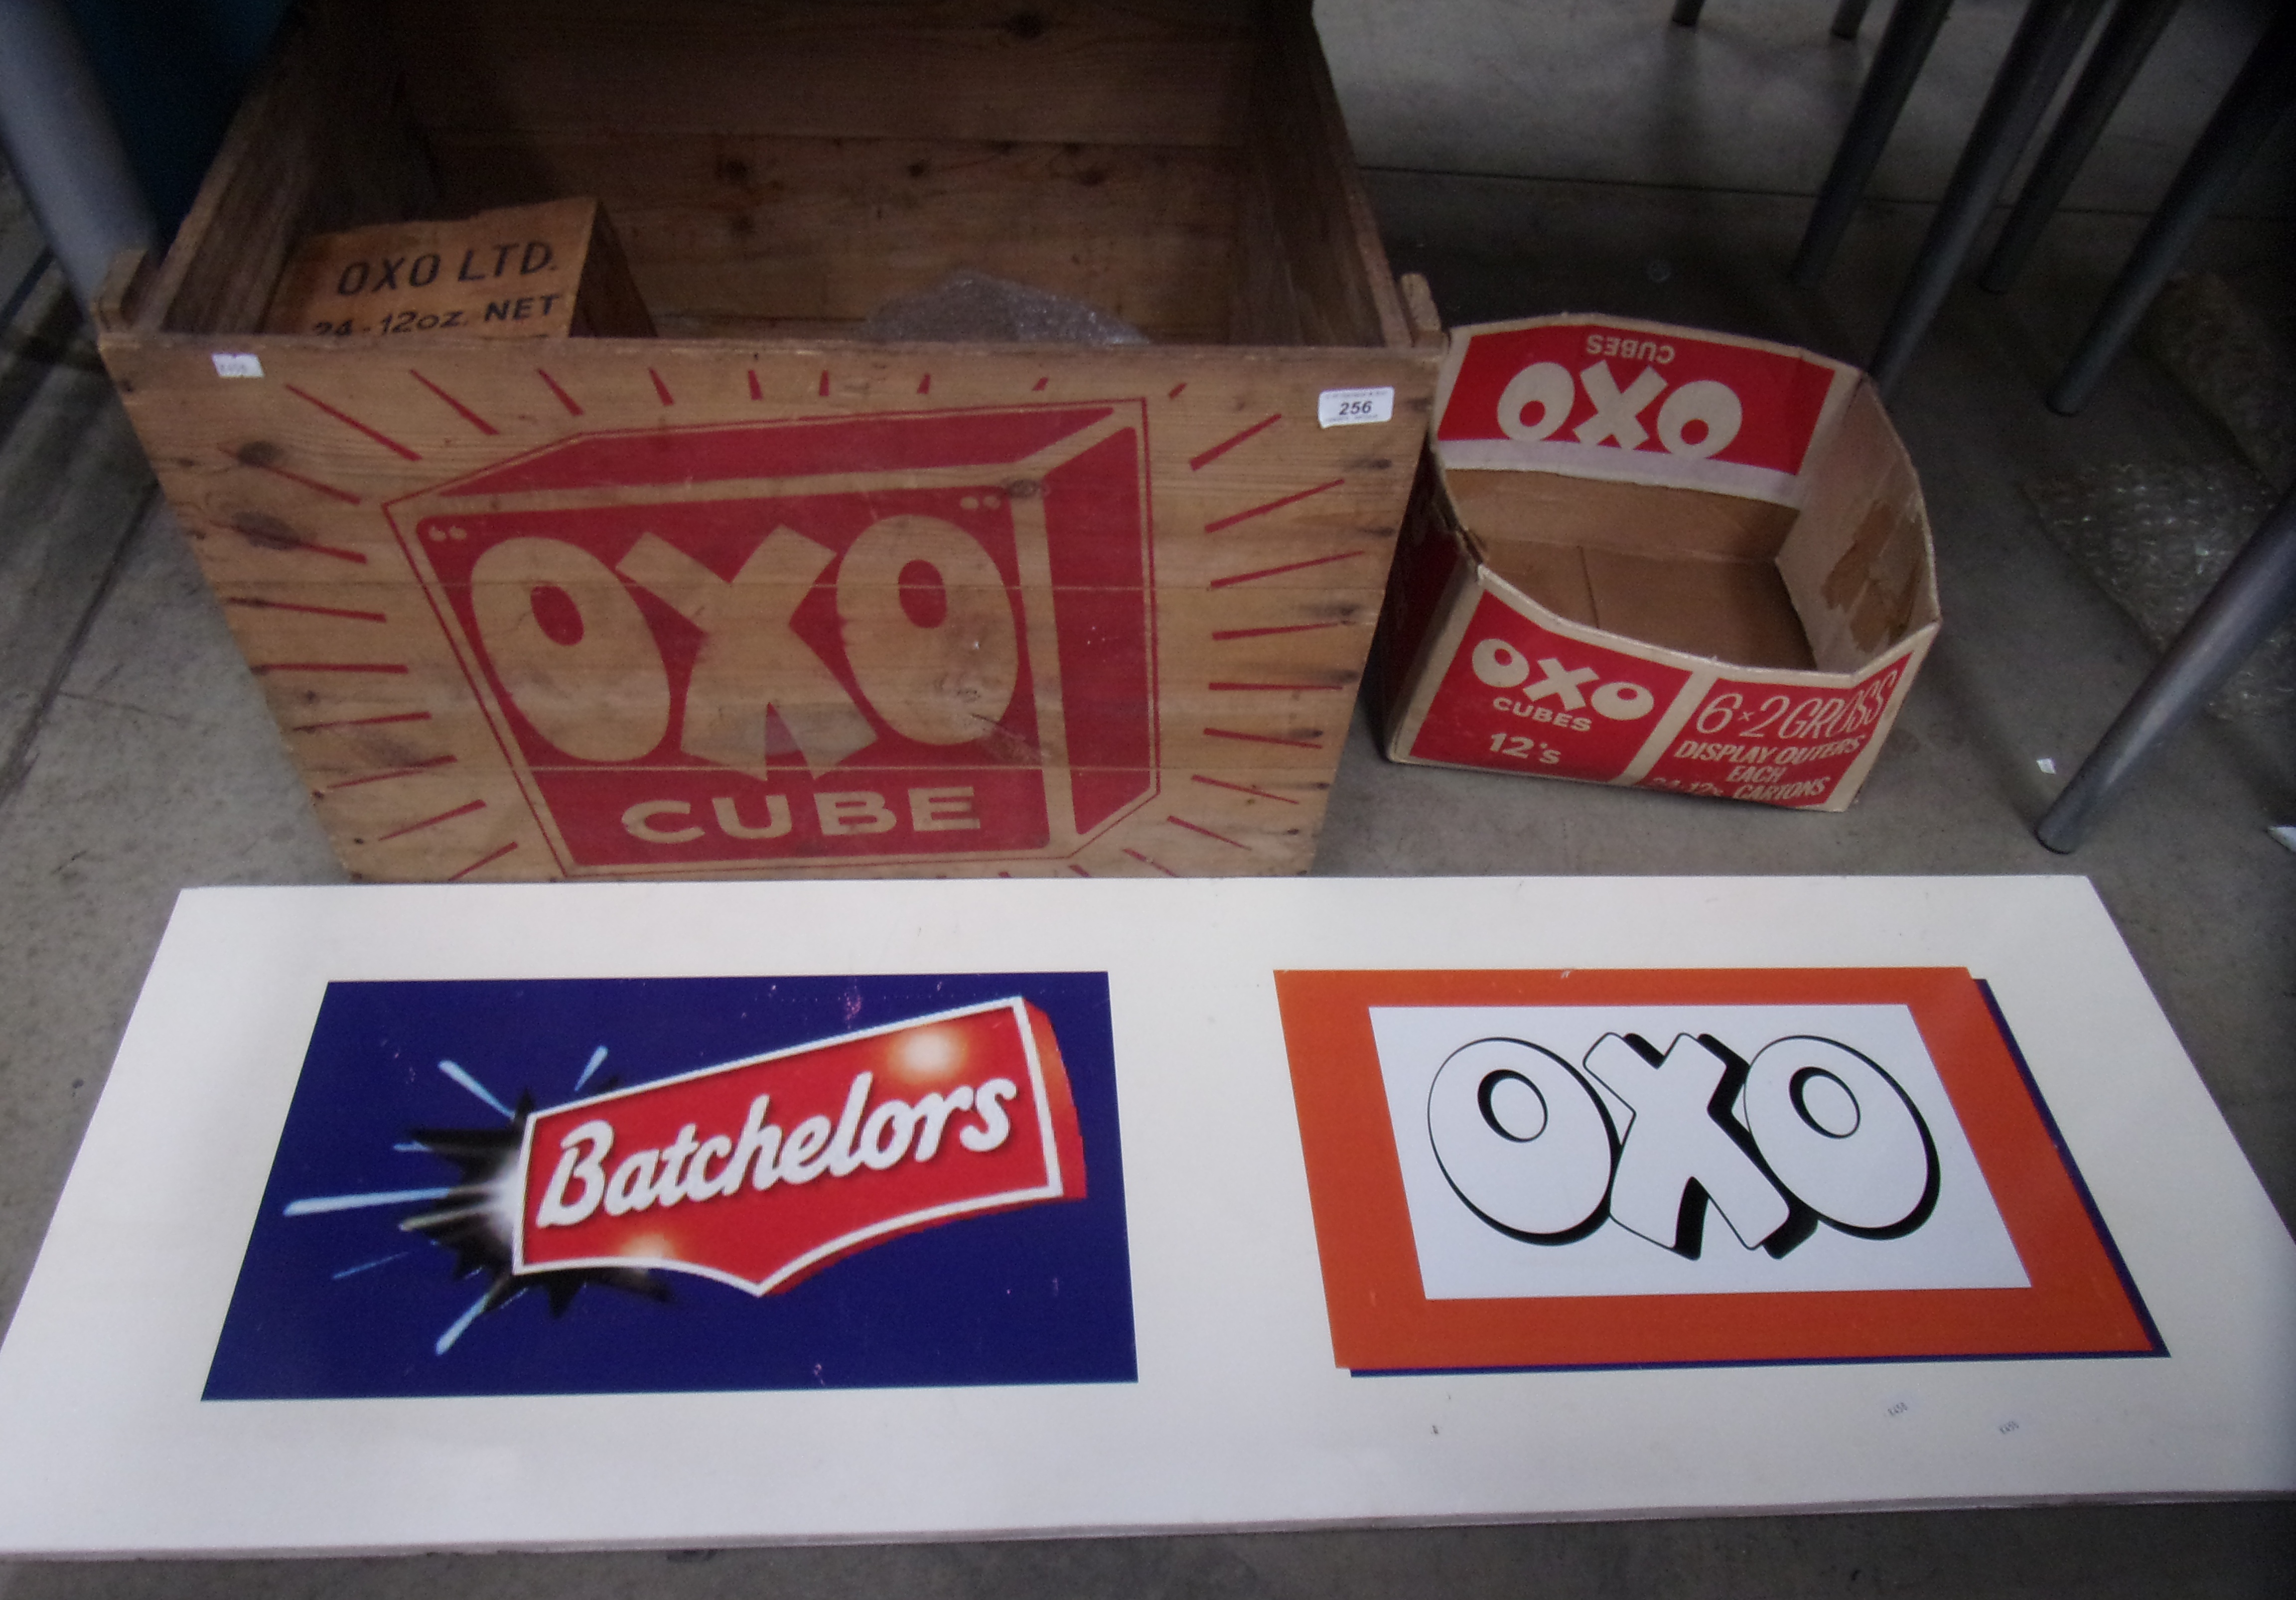 A large pine OXO crate, OXO corned beef